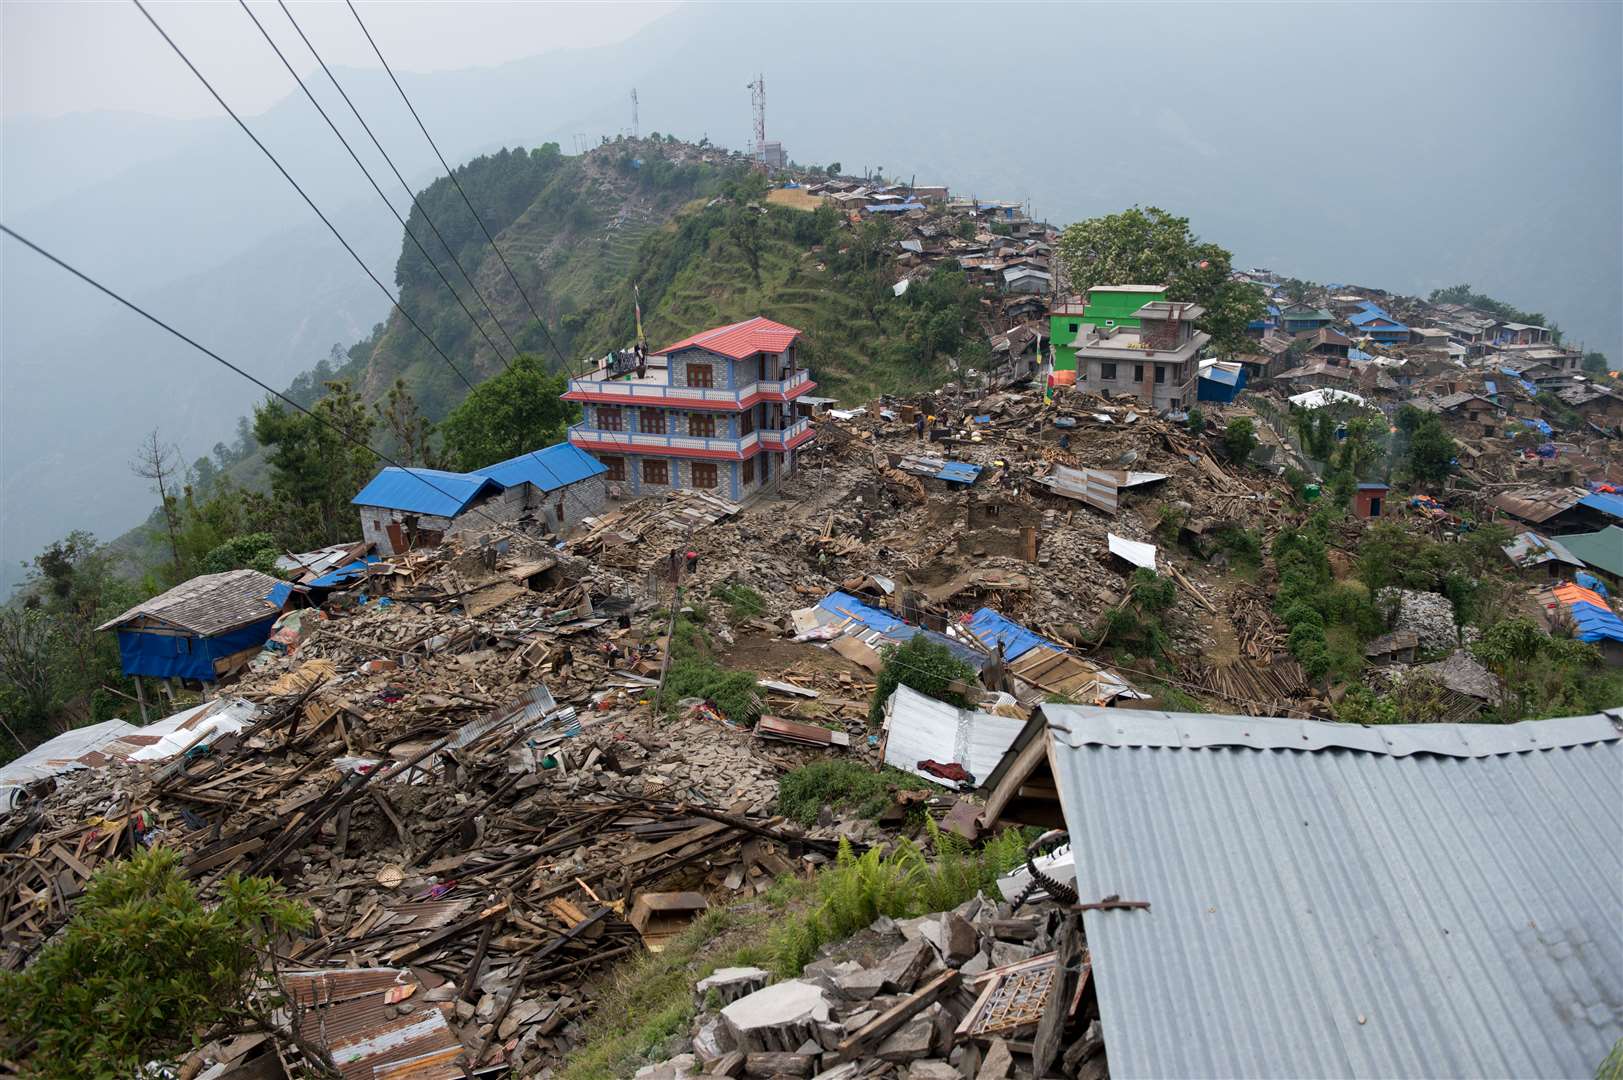 Damage to Nepal from a devastating earthquake in 2015